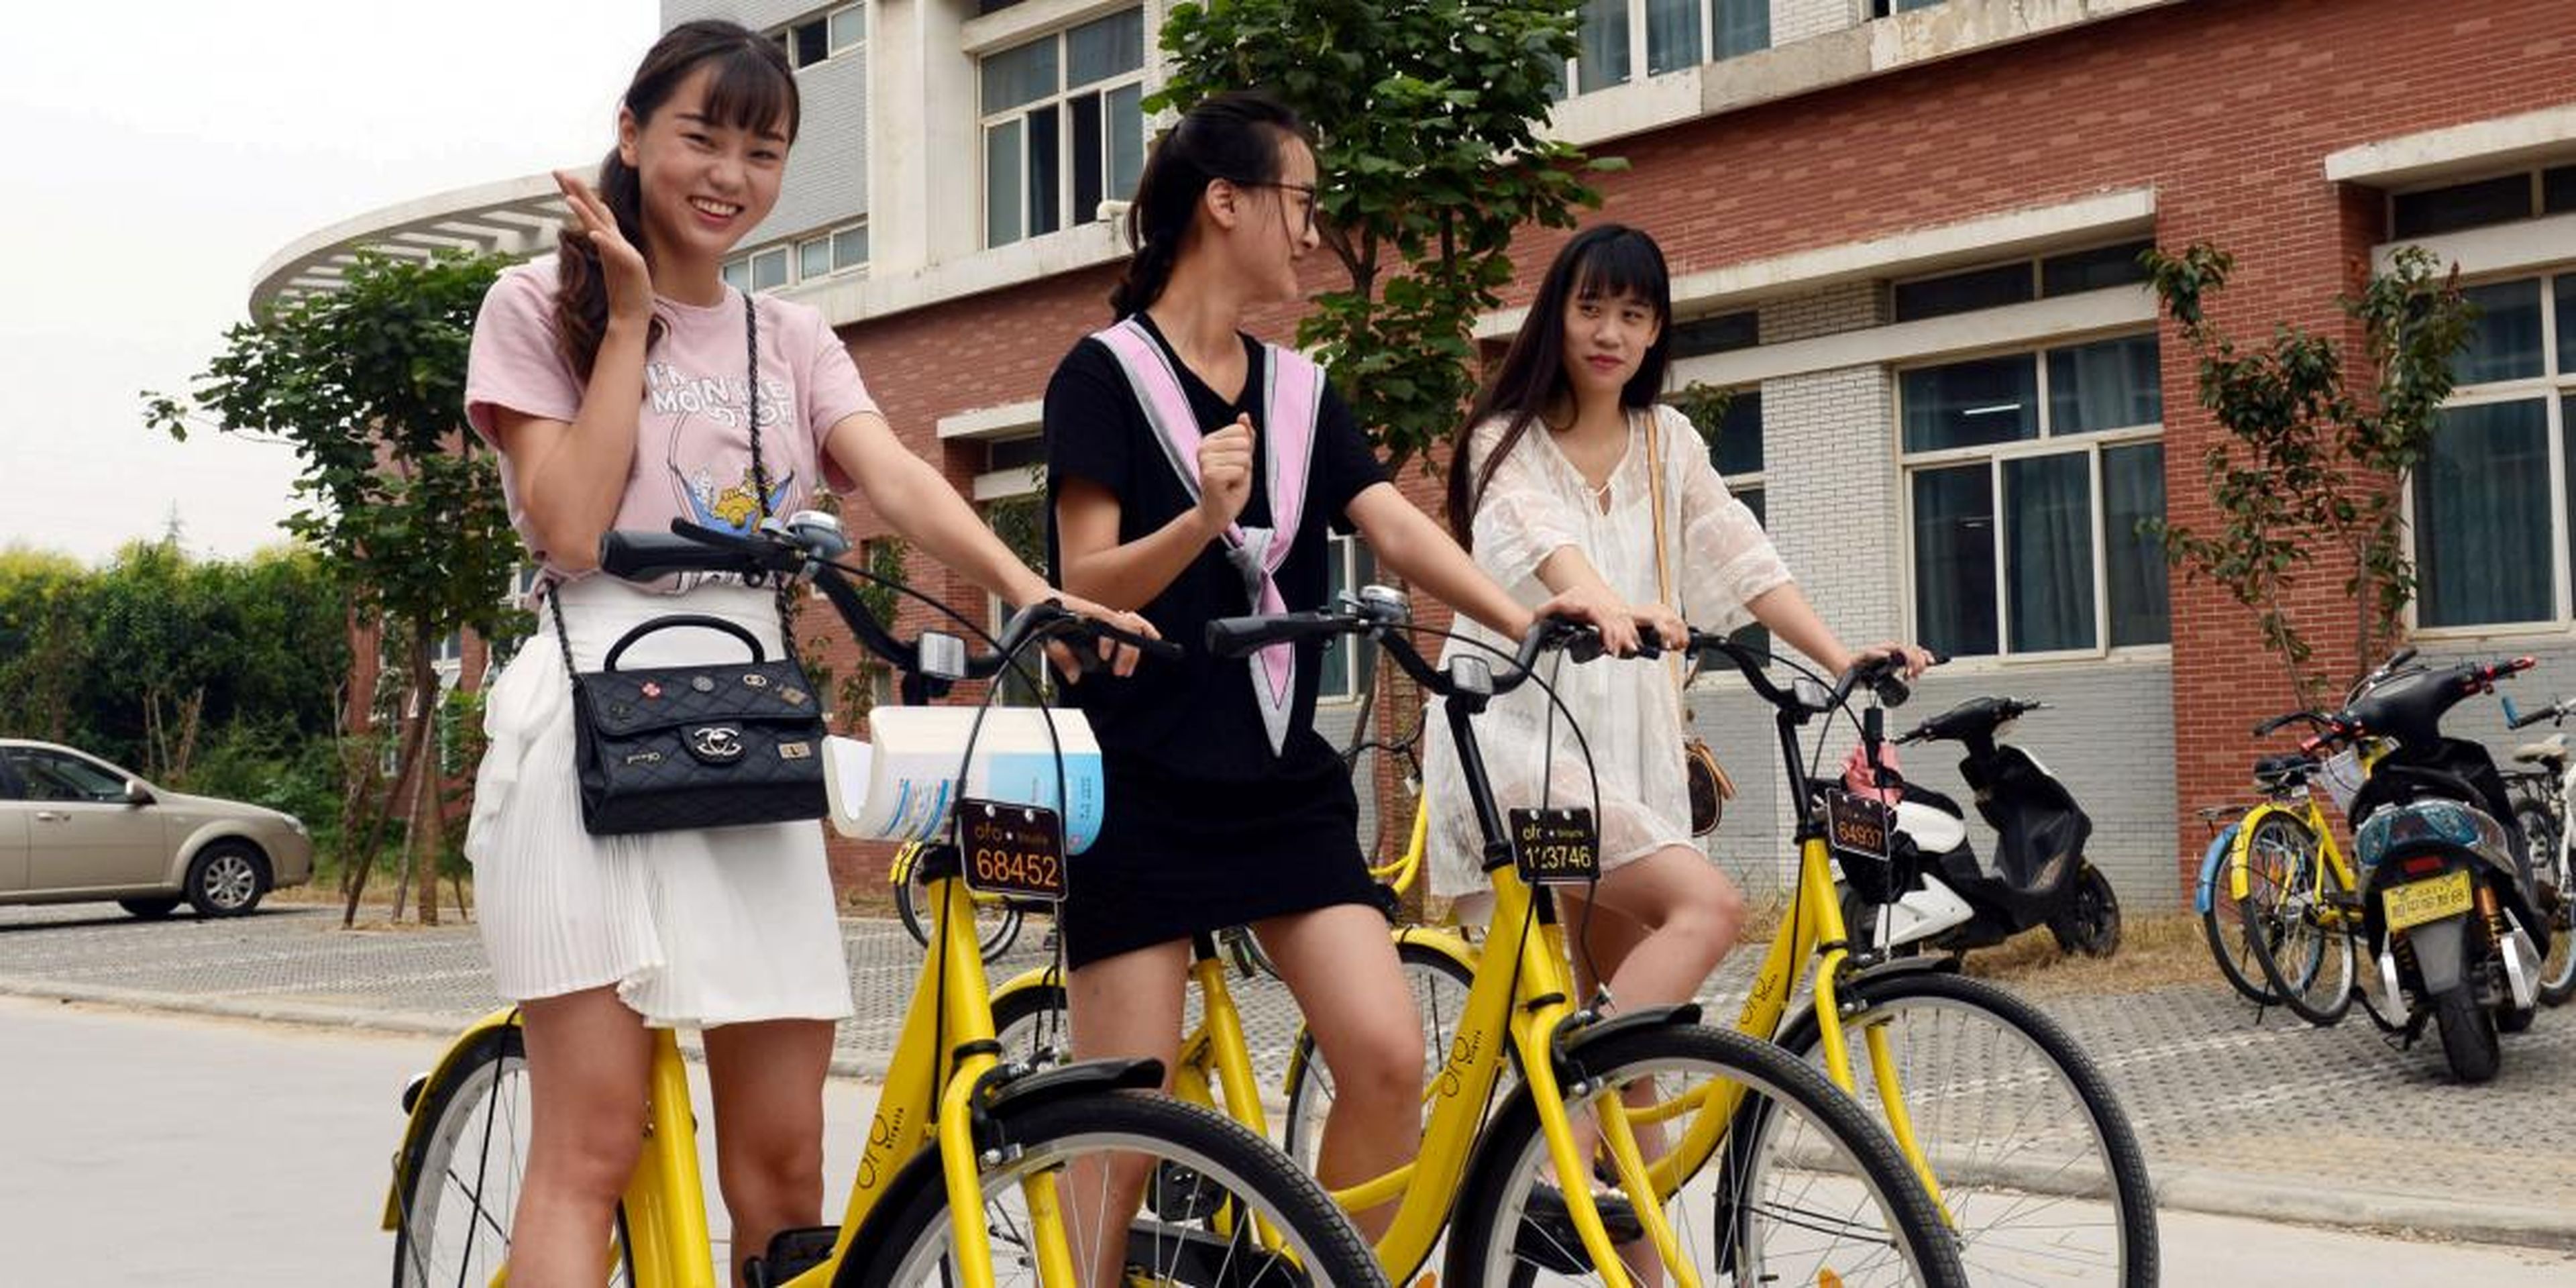 People can rent bikes without having to pay a deposit if they rack up good social credit in Rongcheng, eastern China.